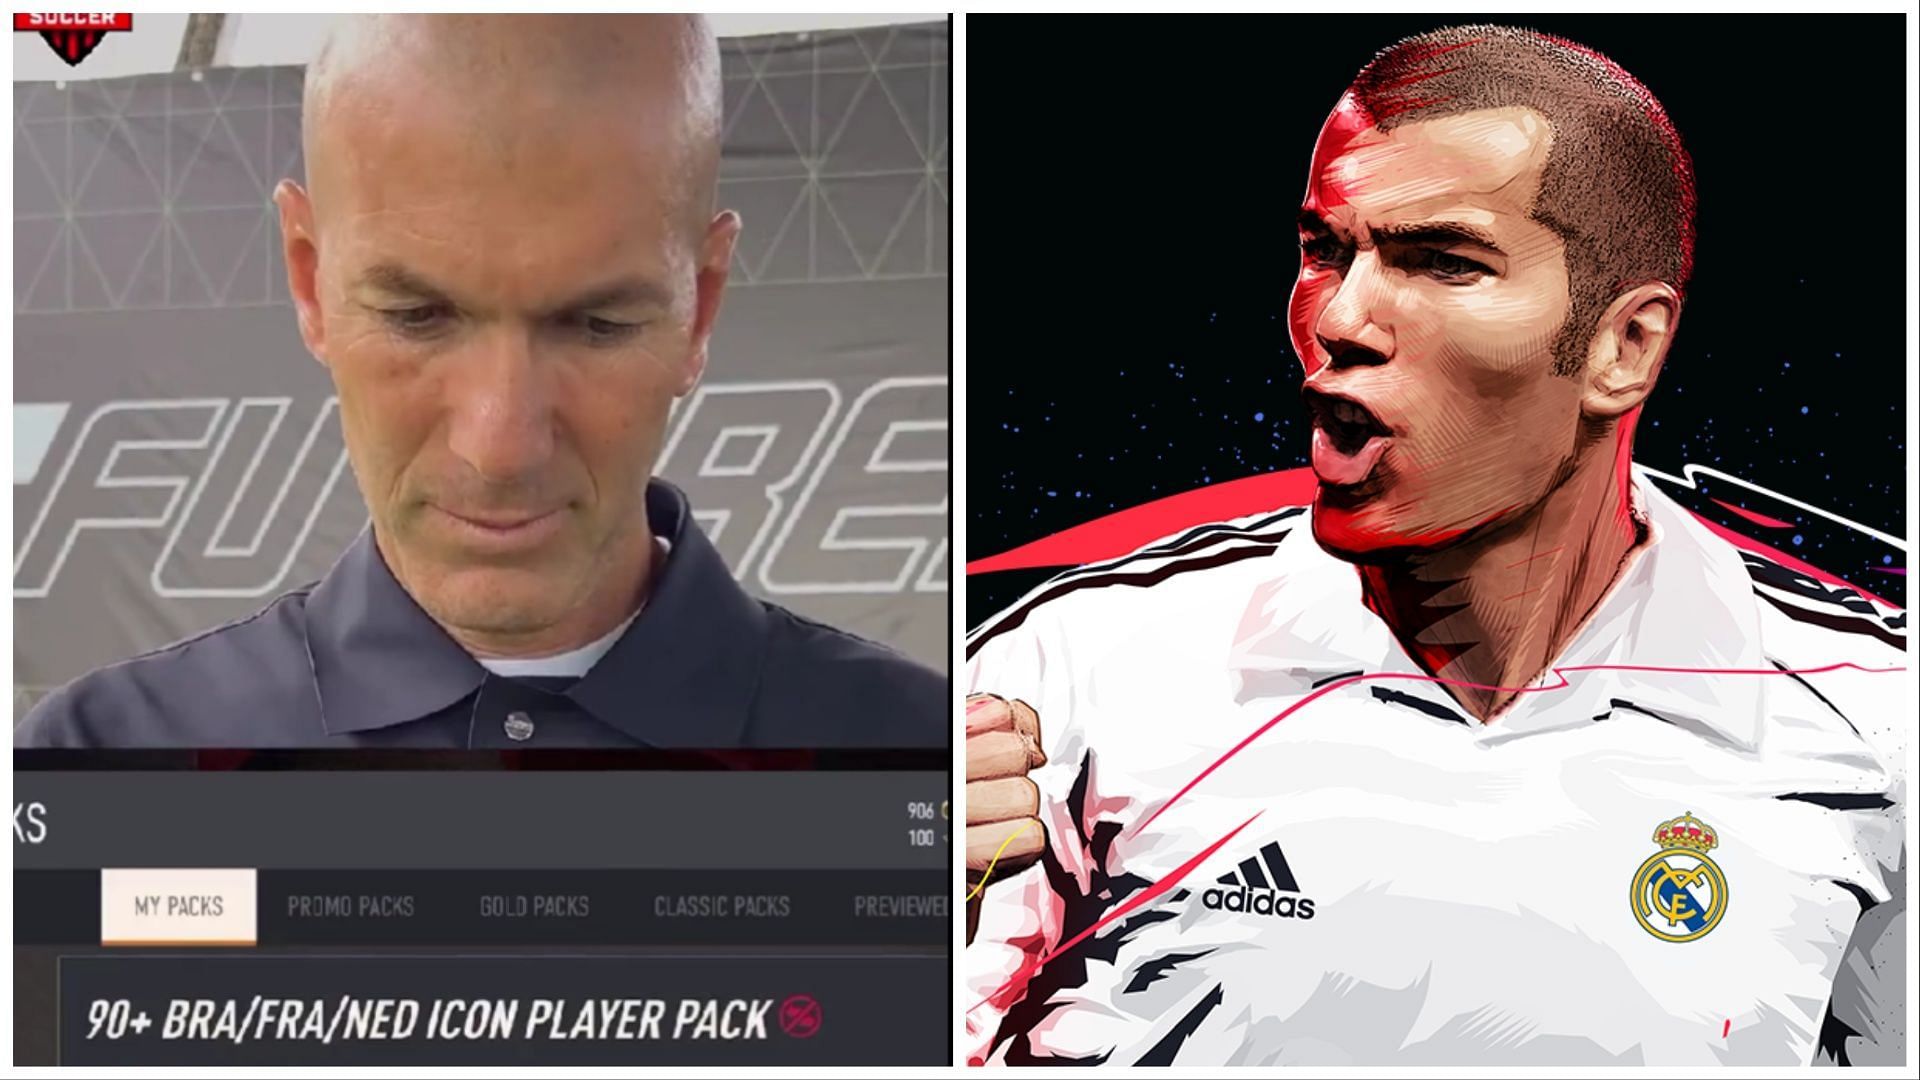 Zidane had some amazing luck in FIFA 23 (Images via Sports Illustrated Soccer and EA Sports)